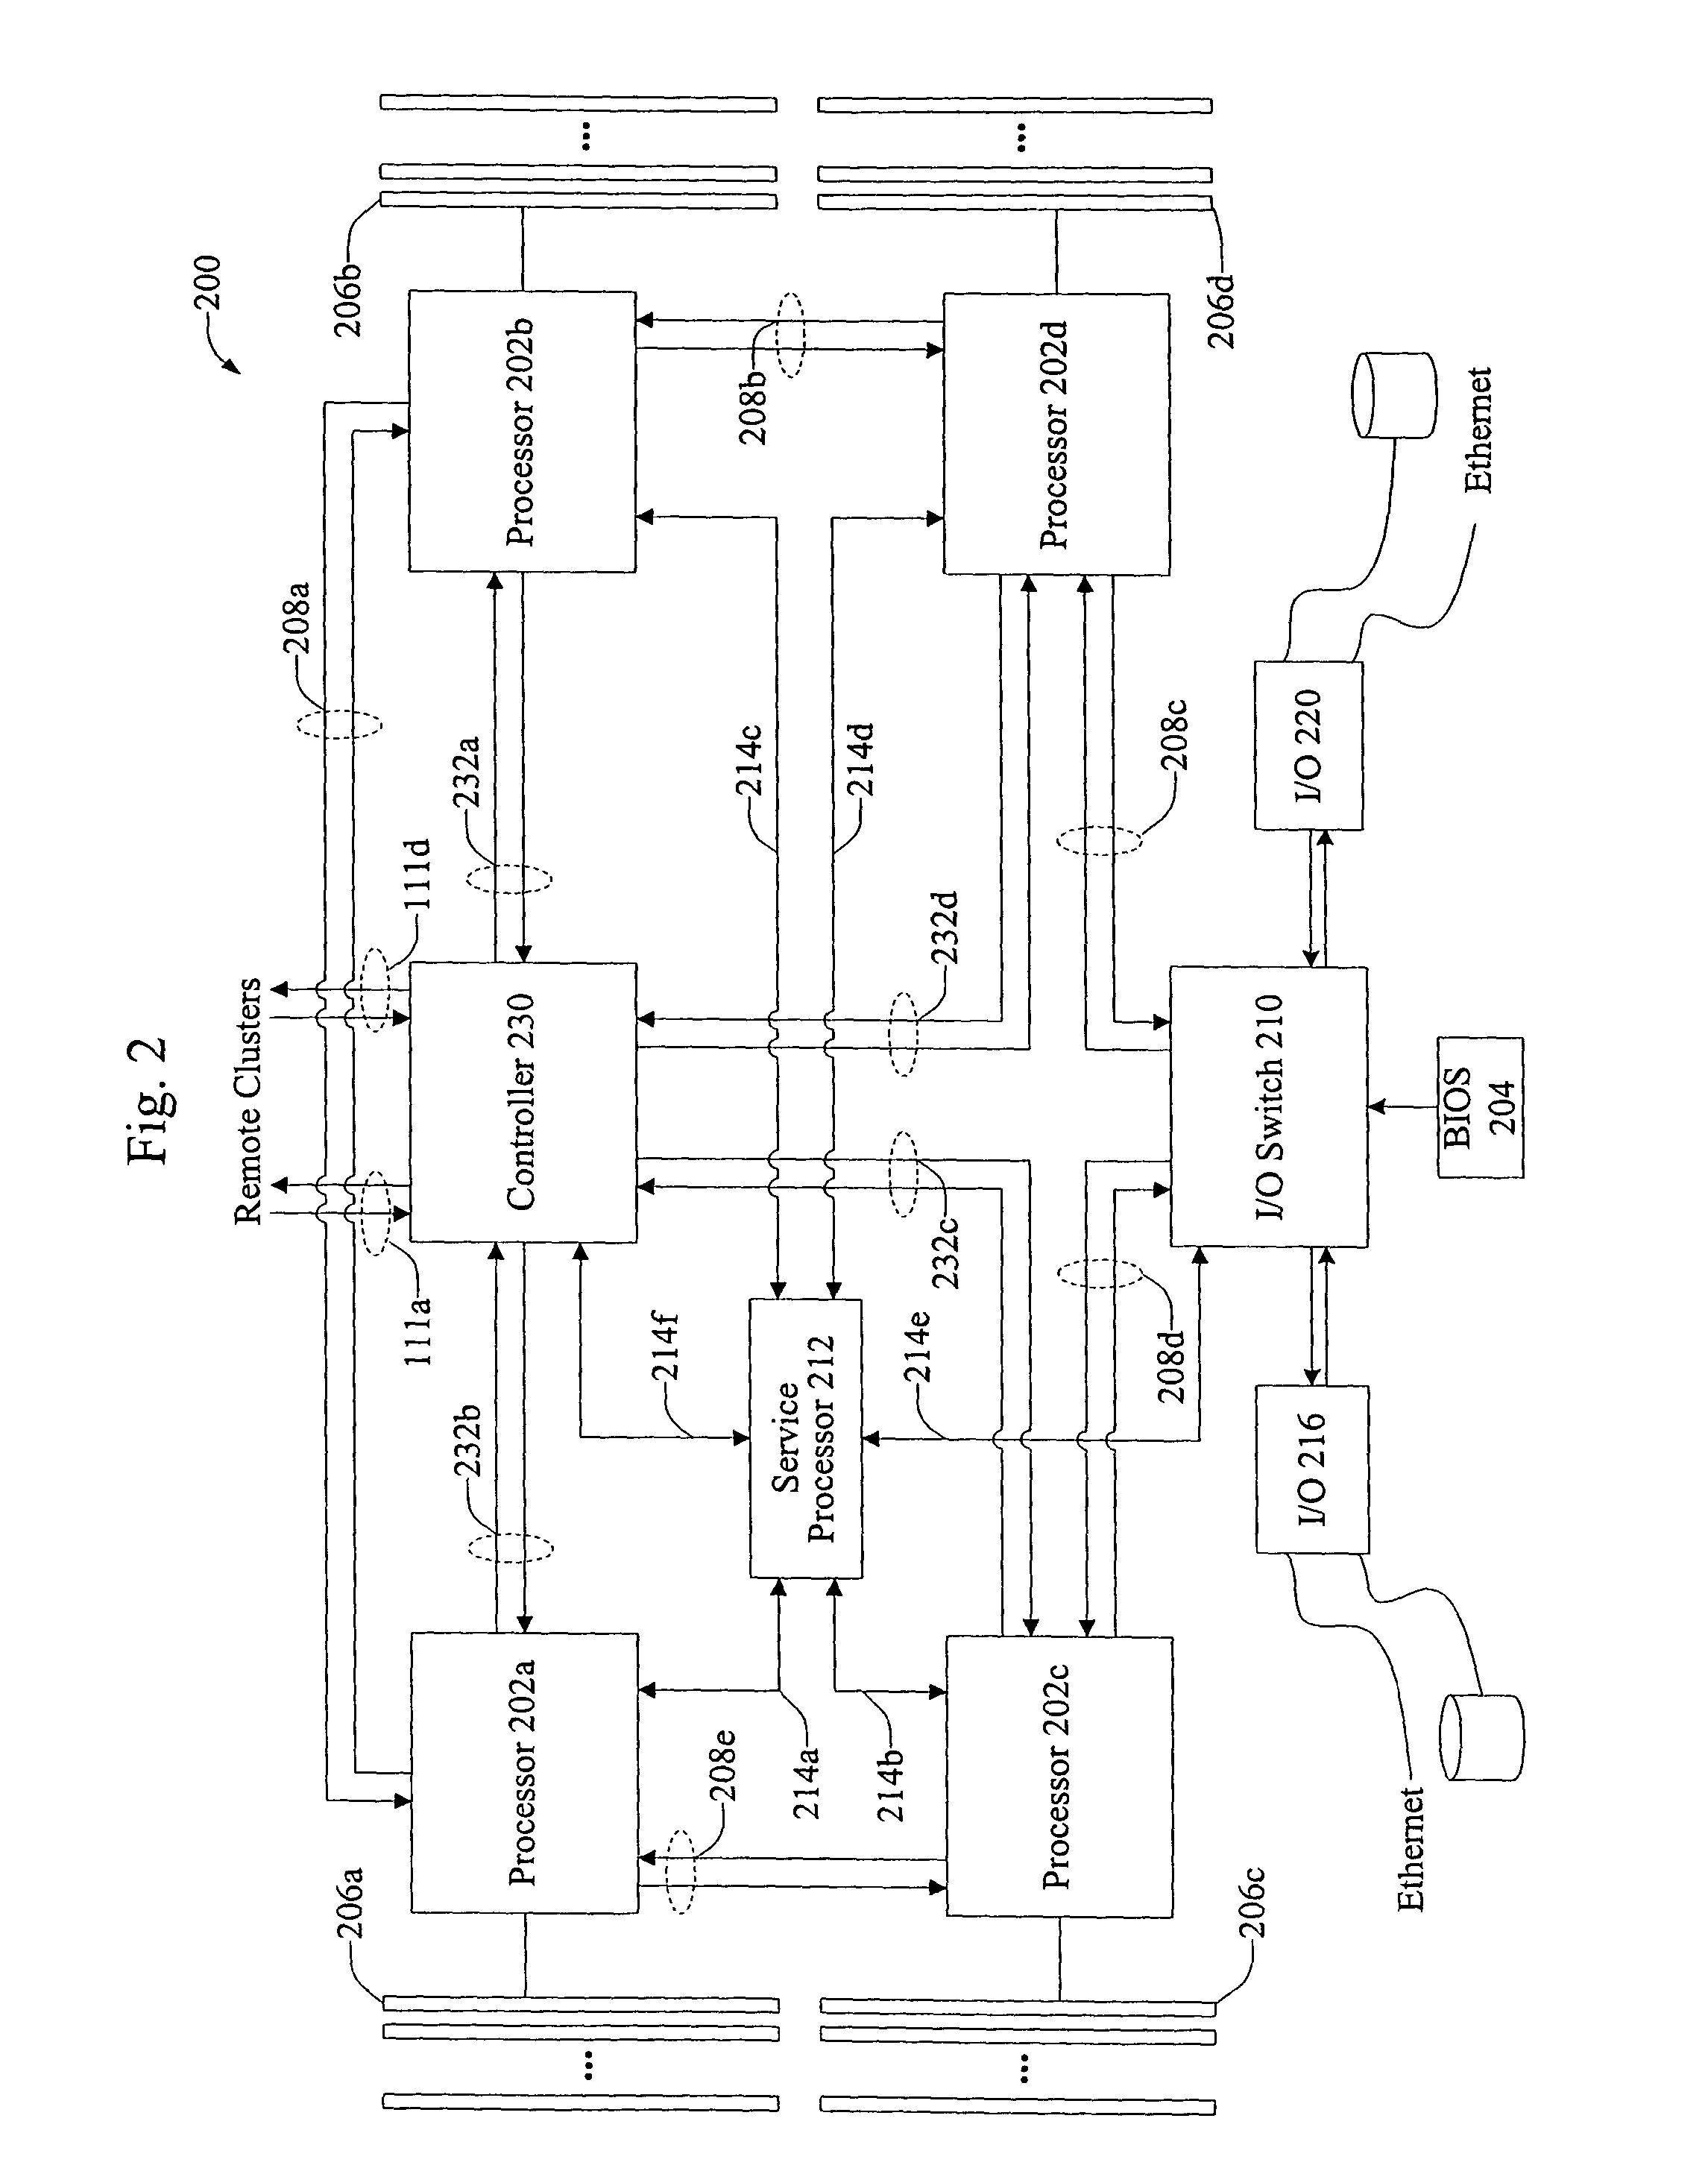 Reliable communication between multi-processor clusters of multi-cluster computer systems